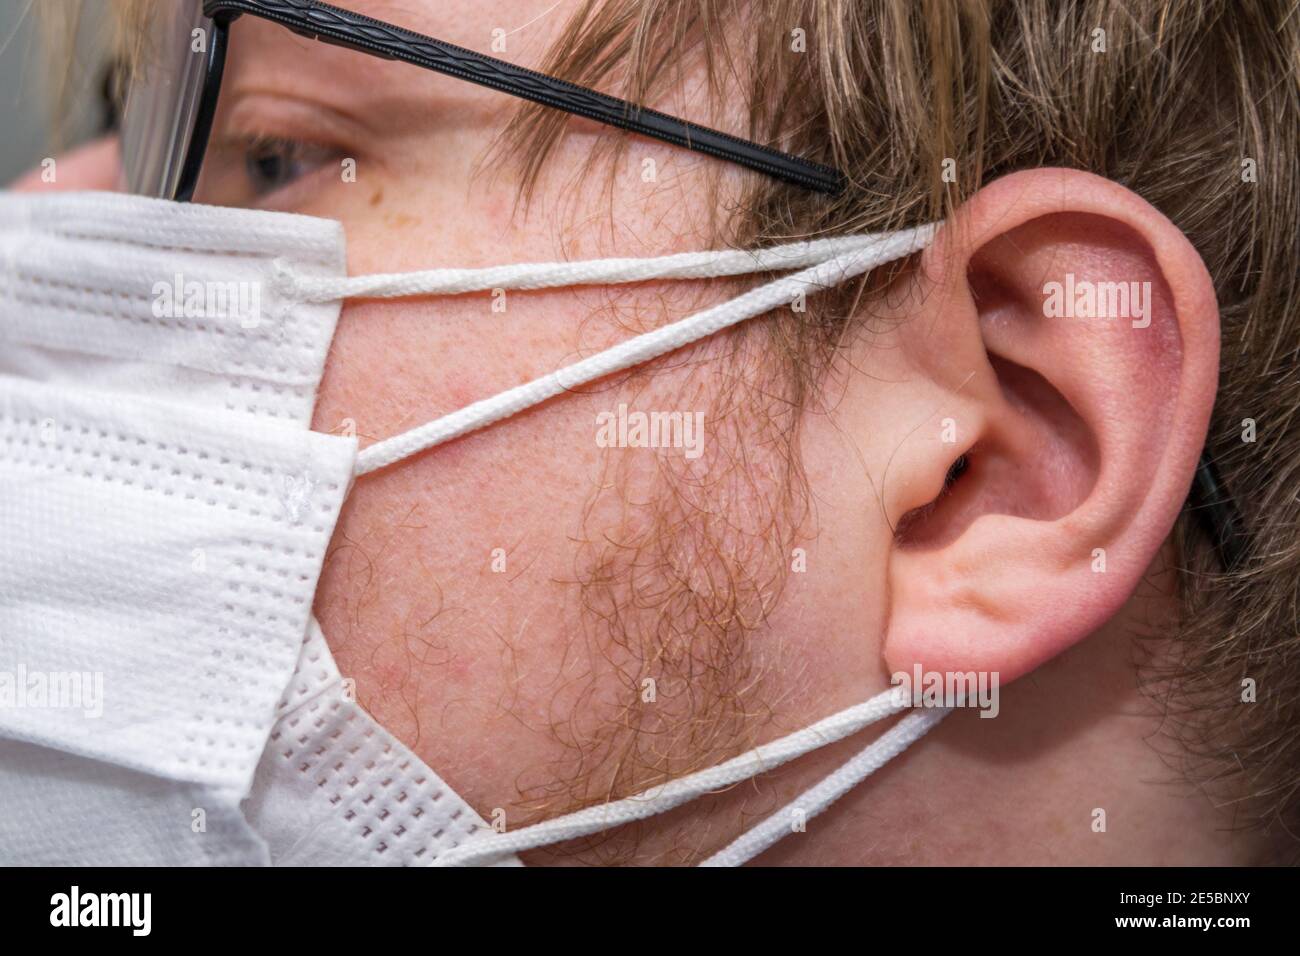 Man wearing two white facemasks for Covid-19 prevention; Round spectacles, white male, blond hair. Side view, zoomed. Stock Photo